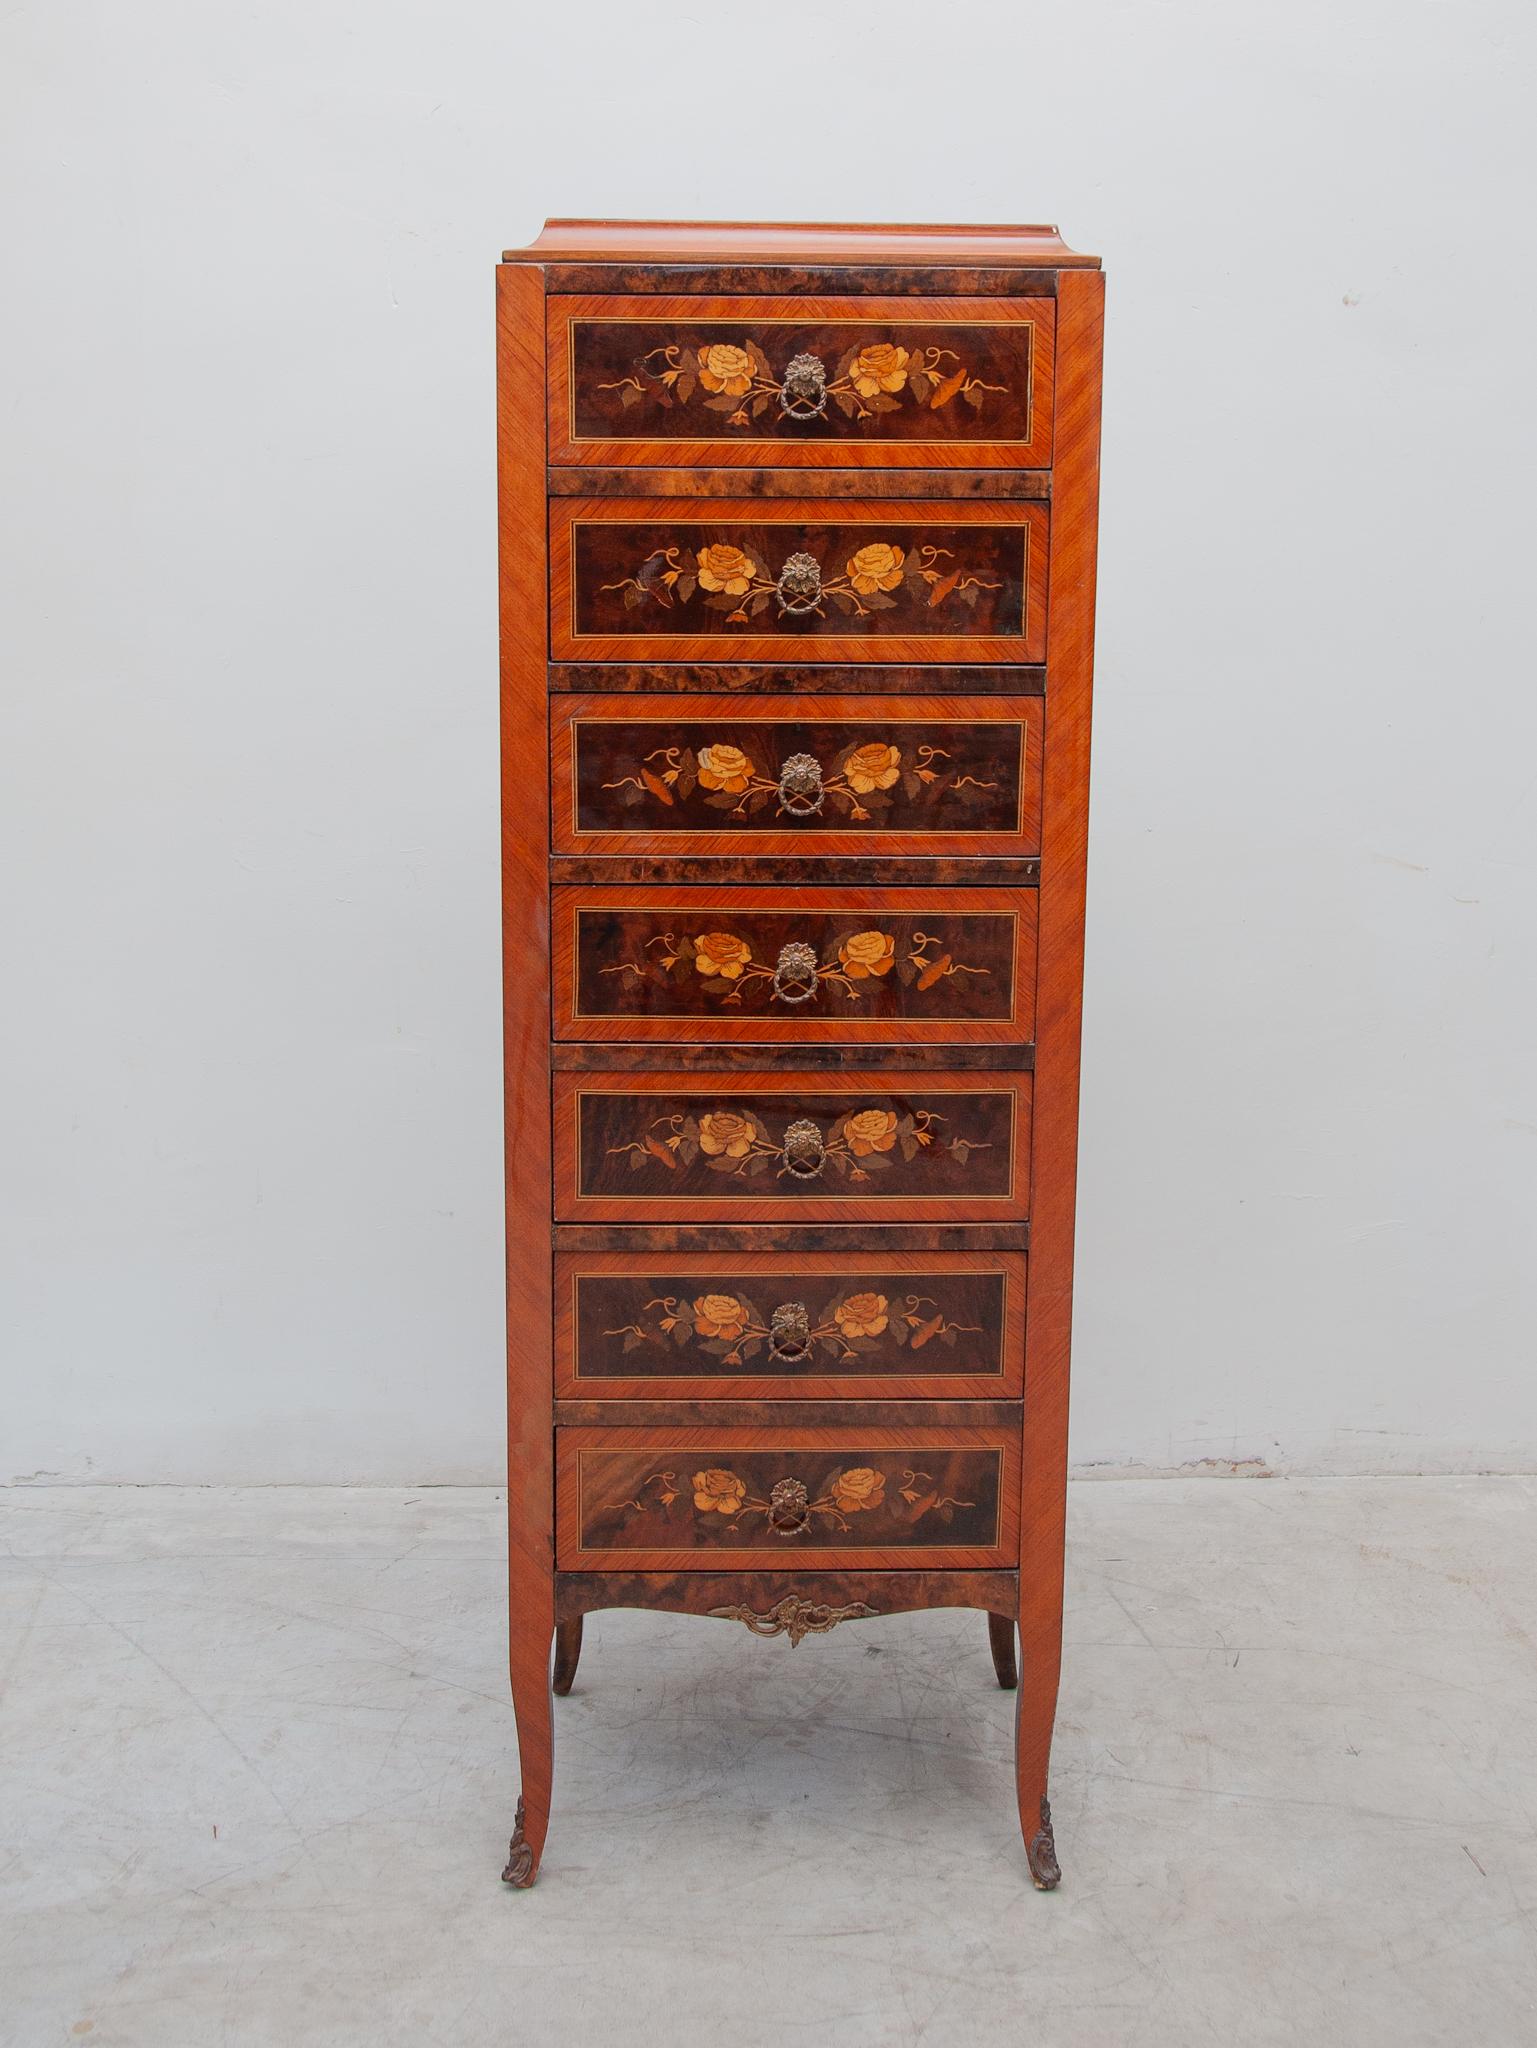 A Beautiful Louis XVI style ormolu-mounted marquetry  seven drawers tall rectangular dresser each drawer with nice floral marquetry designs. In original good condition.